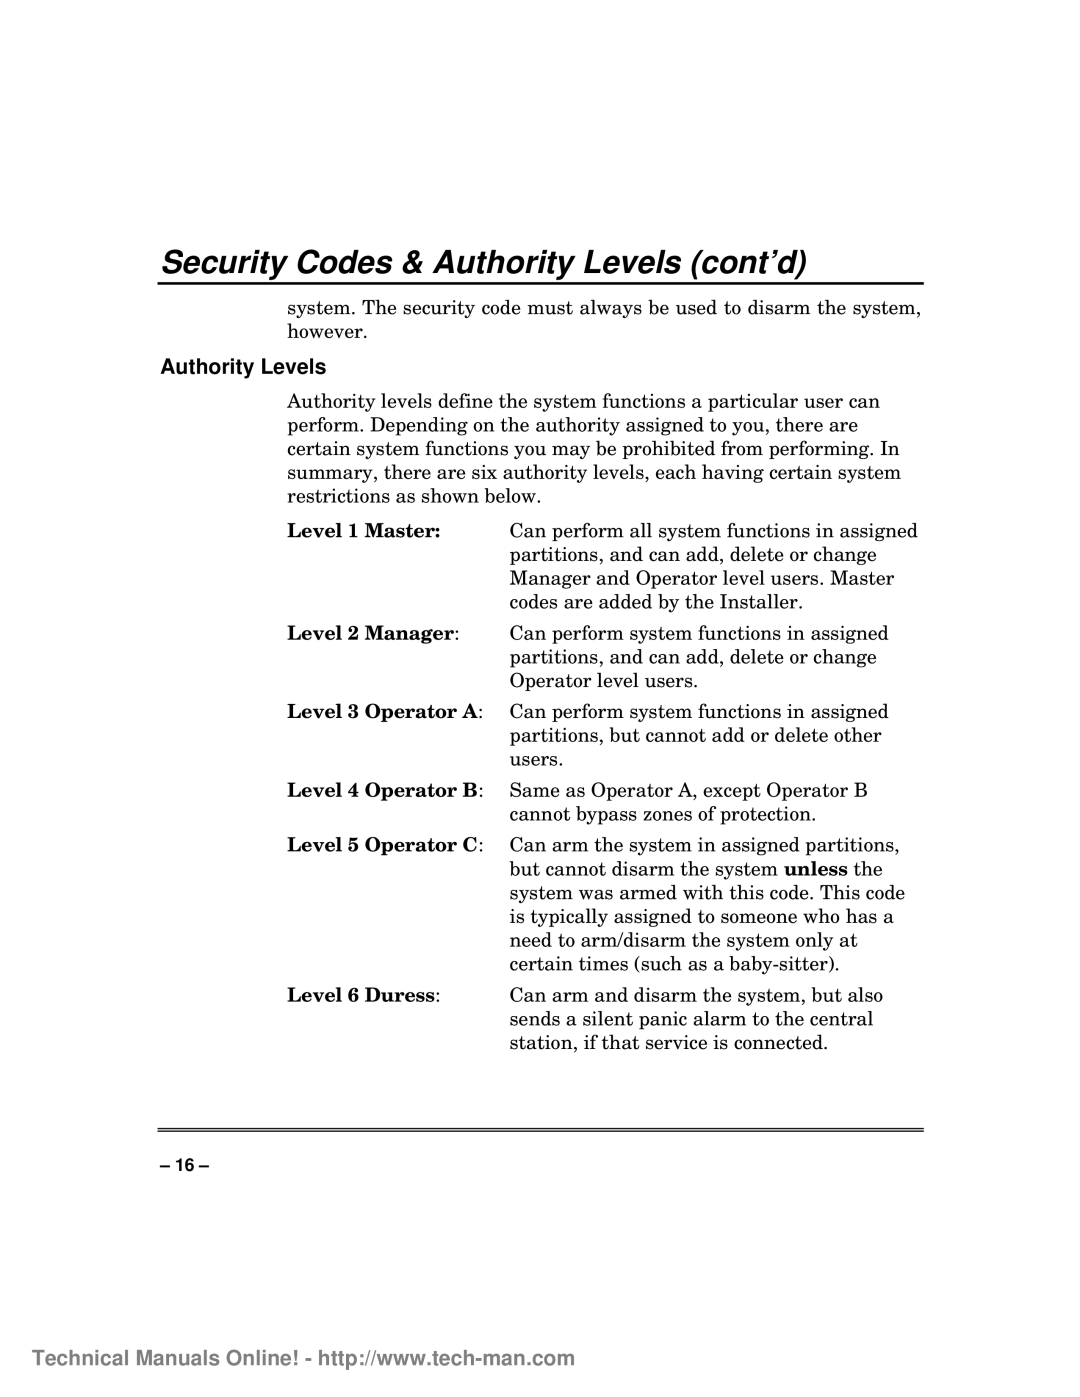 First Alert fa1600c, FA1600C/CA/CB technical manual Security Codes & Authority Levels cont’d 